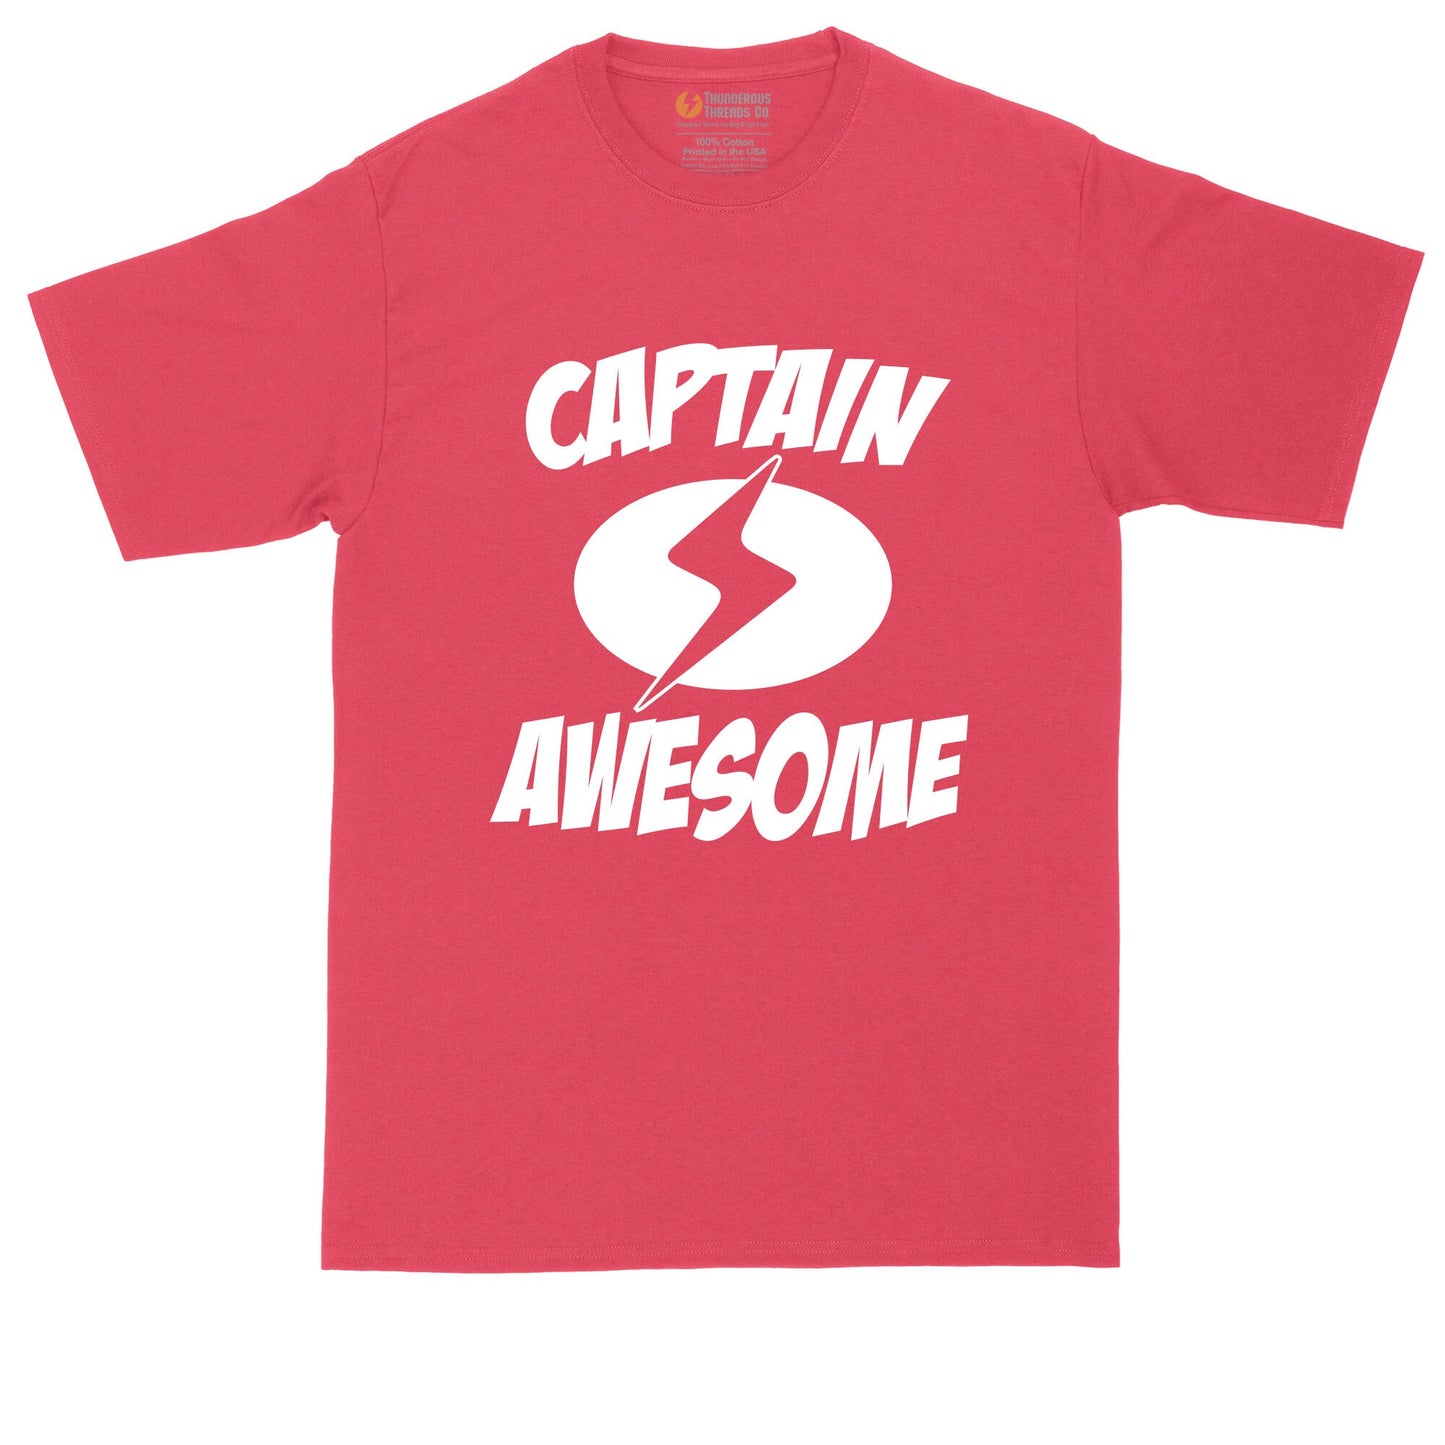 Captain Awesome | Big and Tall Mens T-Shirt | Funny T-Shirt | Graphic T-Shirt